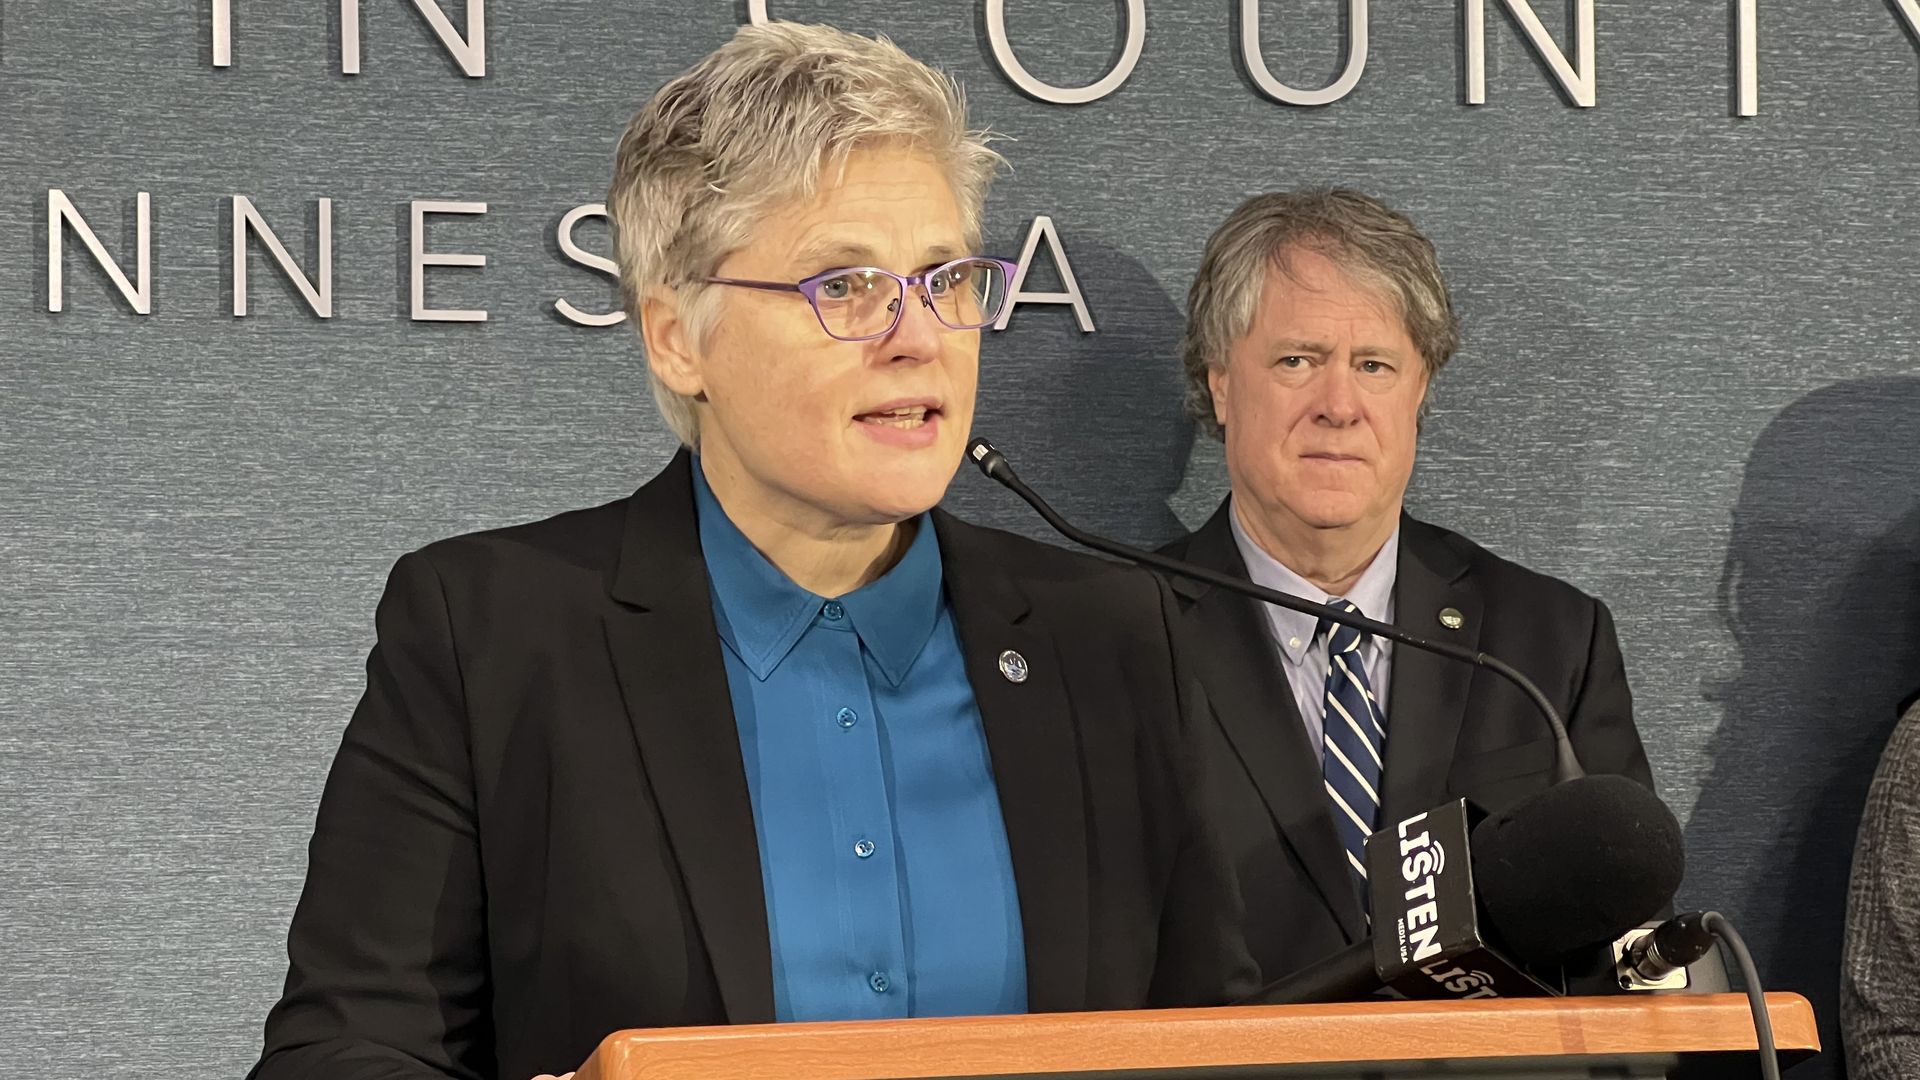 A woman with short, grey hair and glasses wearing a black suit and blue button-down speaks into a microphone as another man looks on from the background.